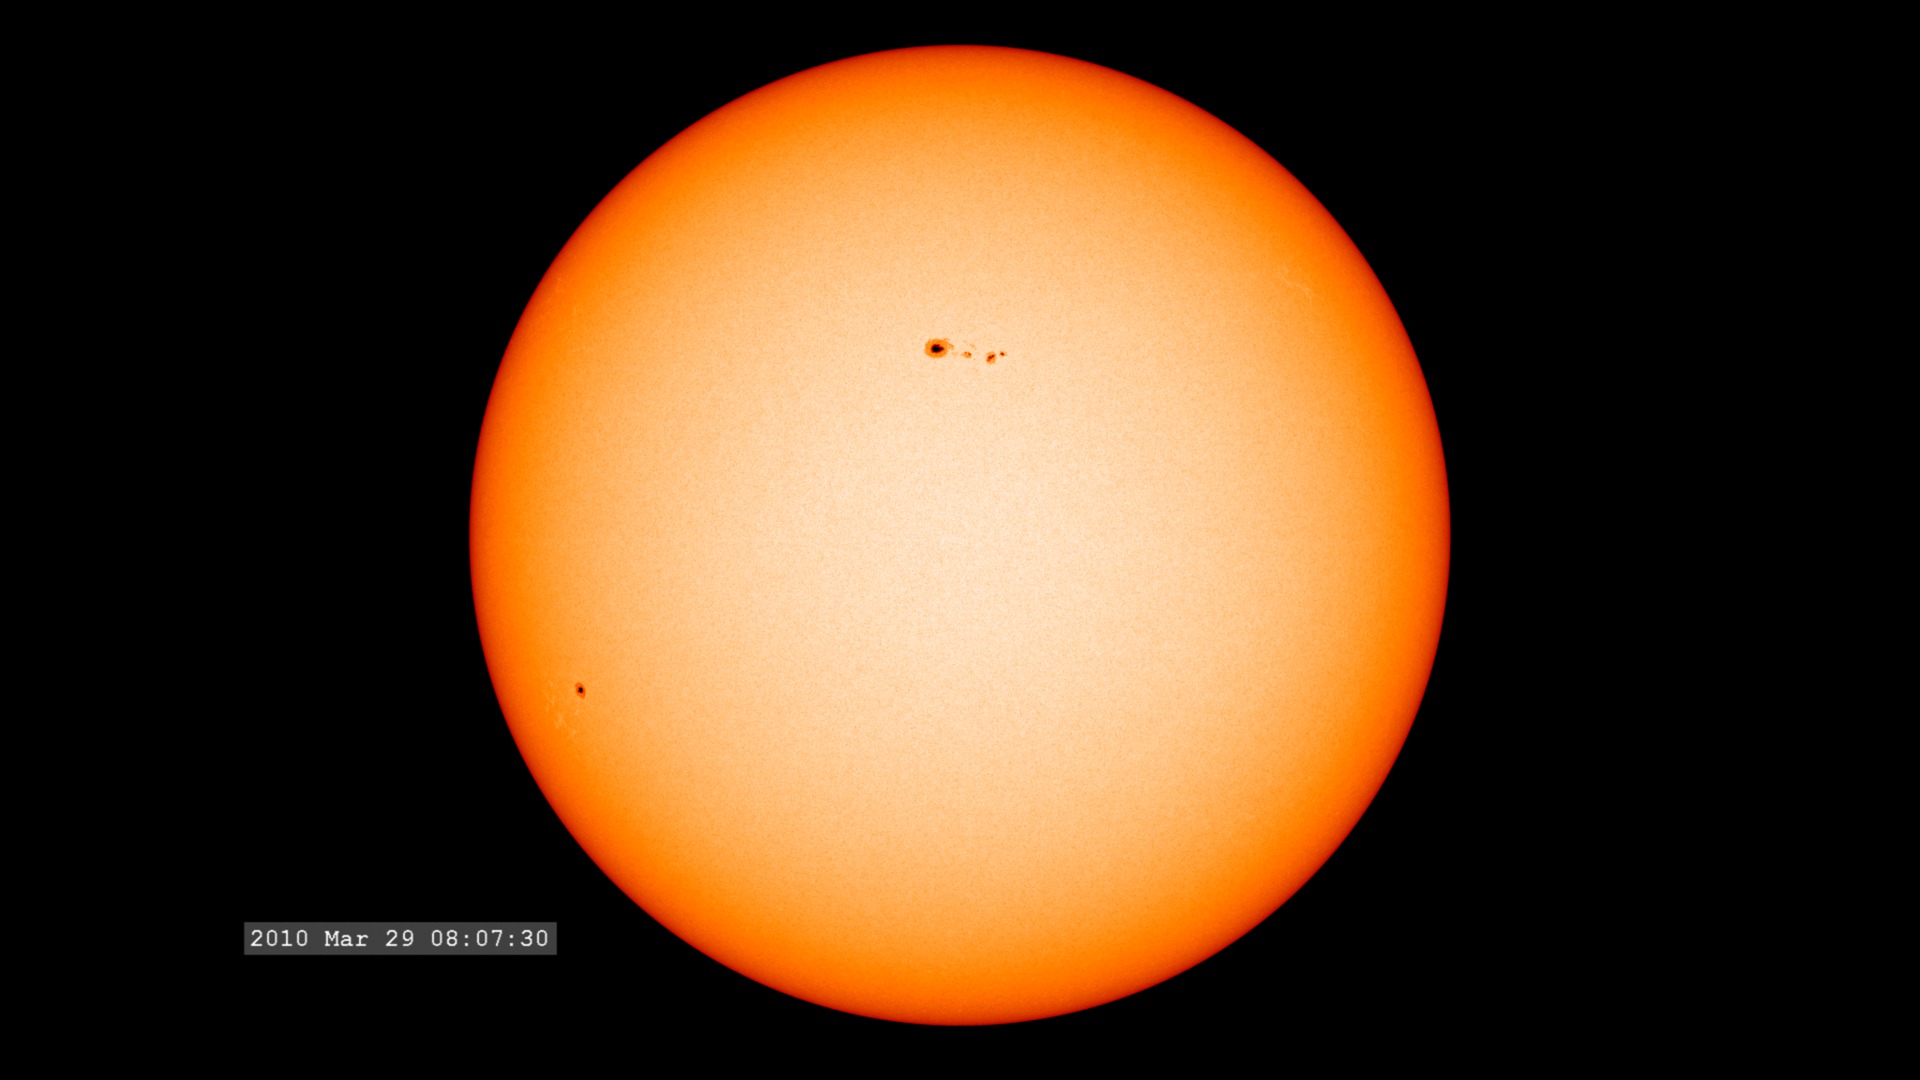 This movie is a full disk view of a large sunspot group visible shortly after HMI turned on their imagers.